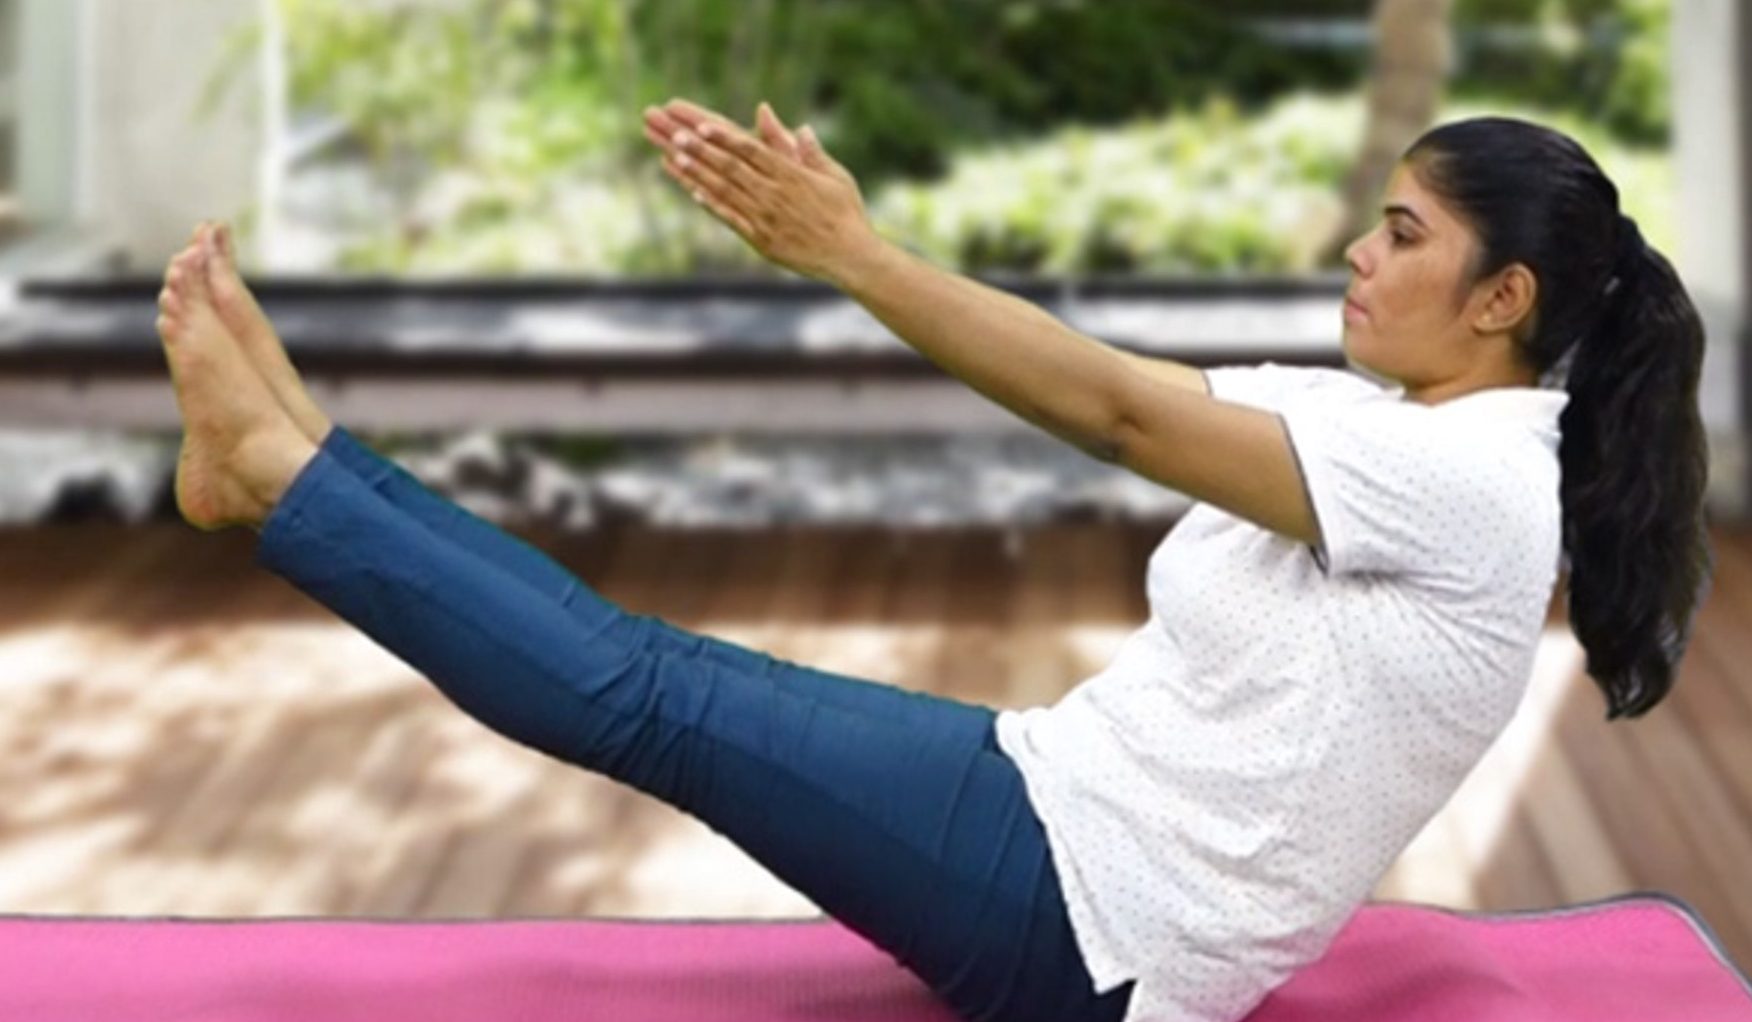 14 Modifications For Common Yoga Poses That You've Never Seen Before